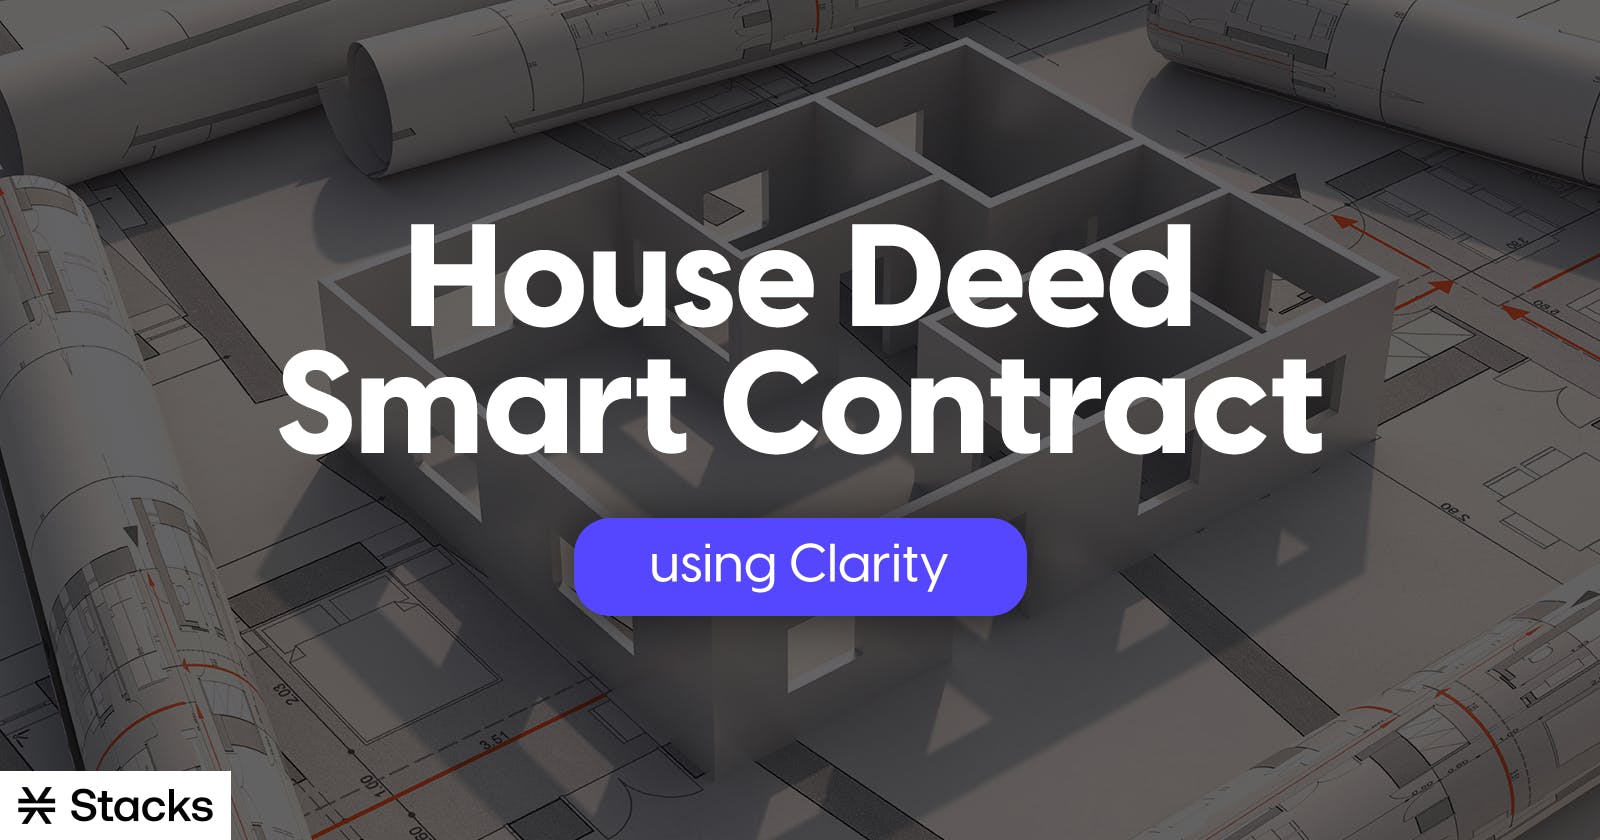 Build a House Deed Smart Contract using Clarity